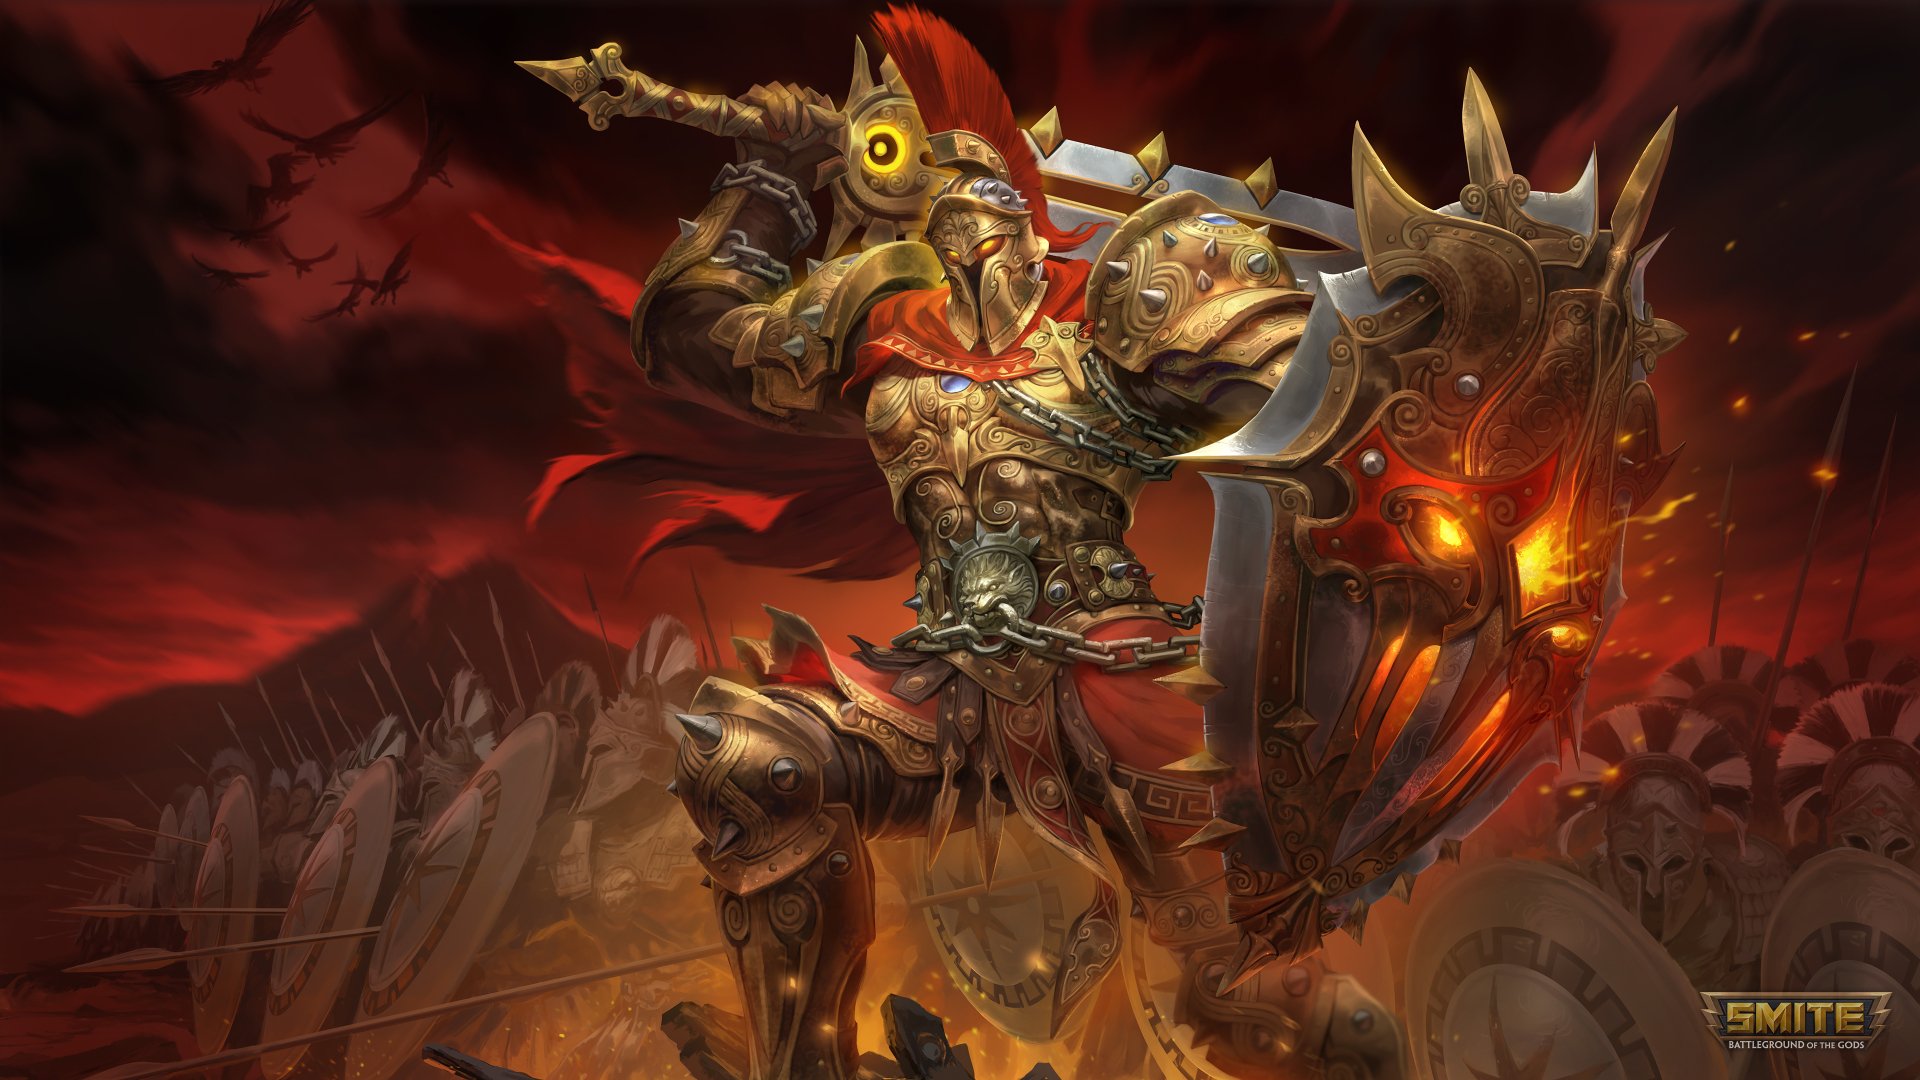 K Ares Smite Wallpapers Background Images